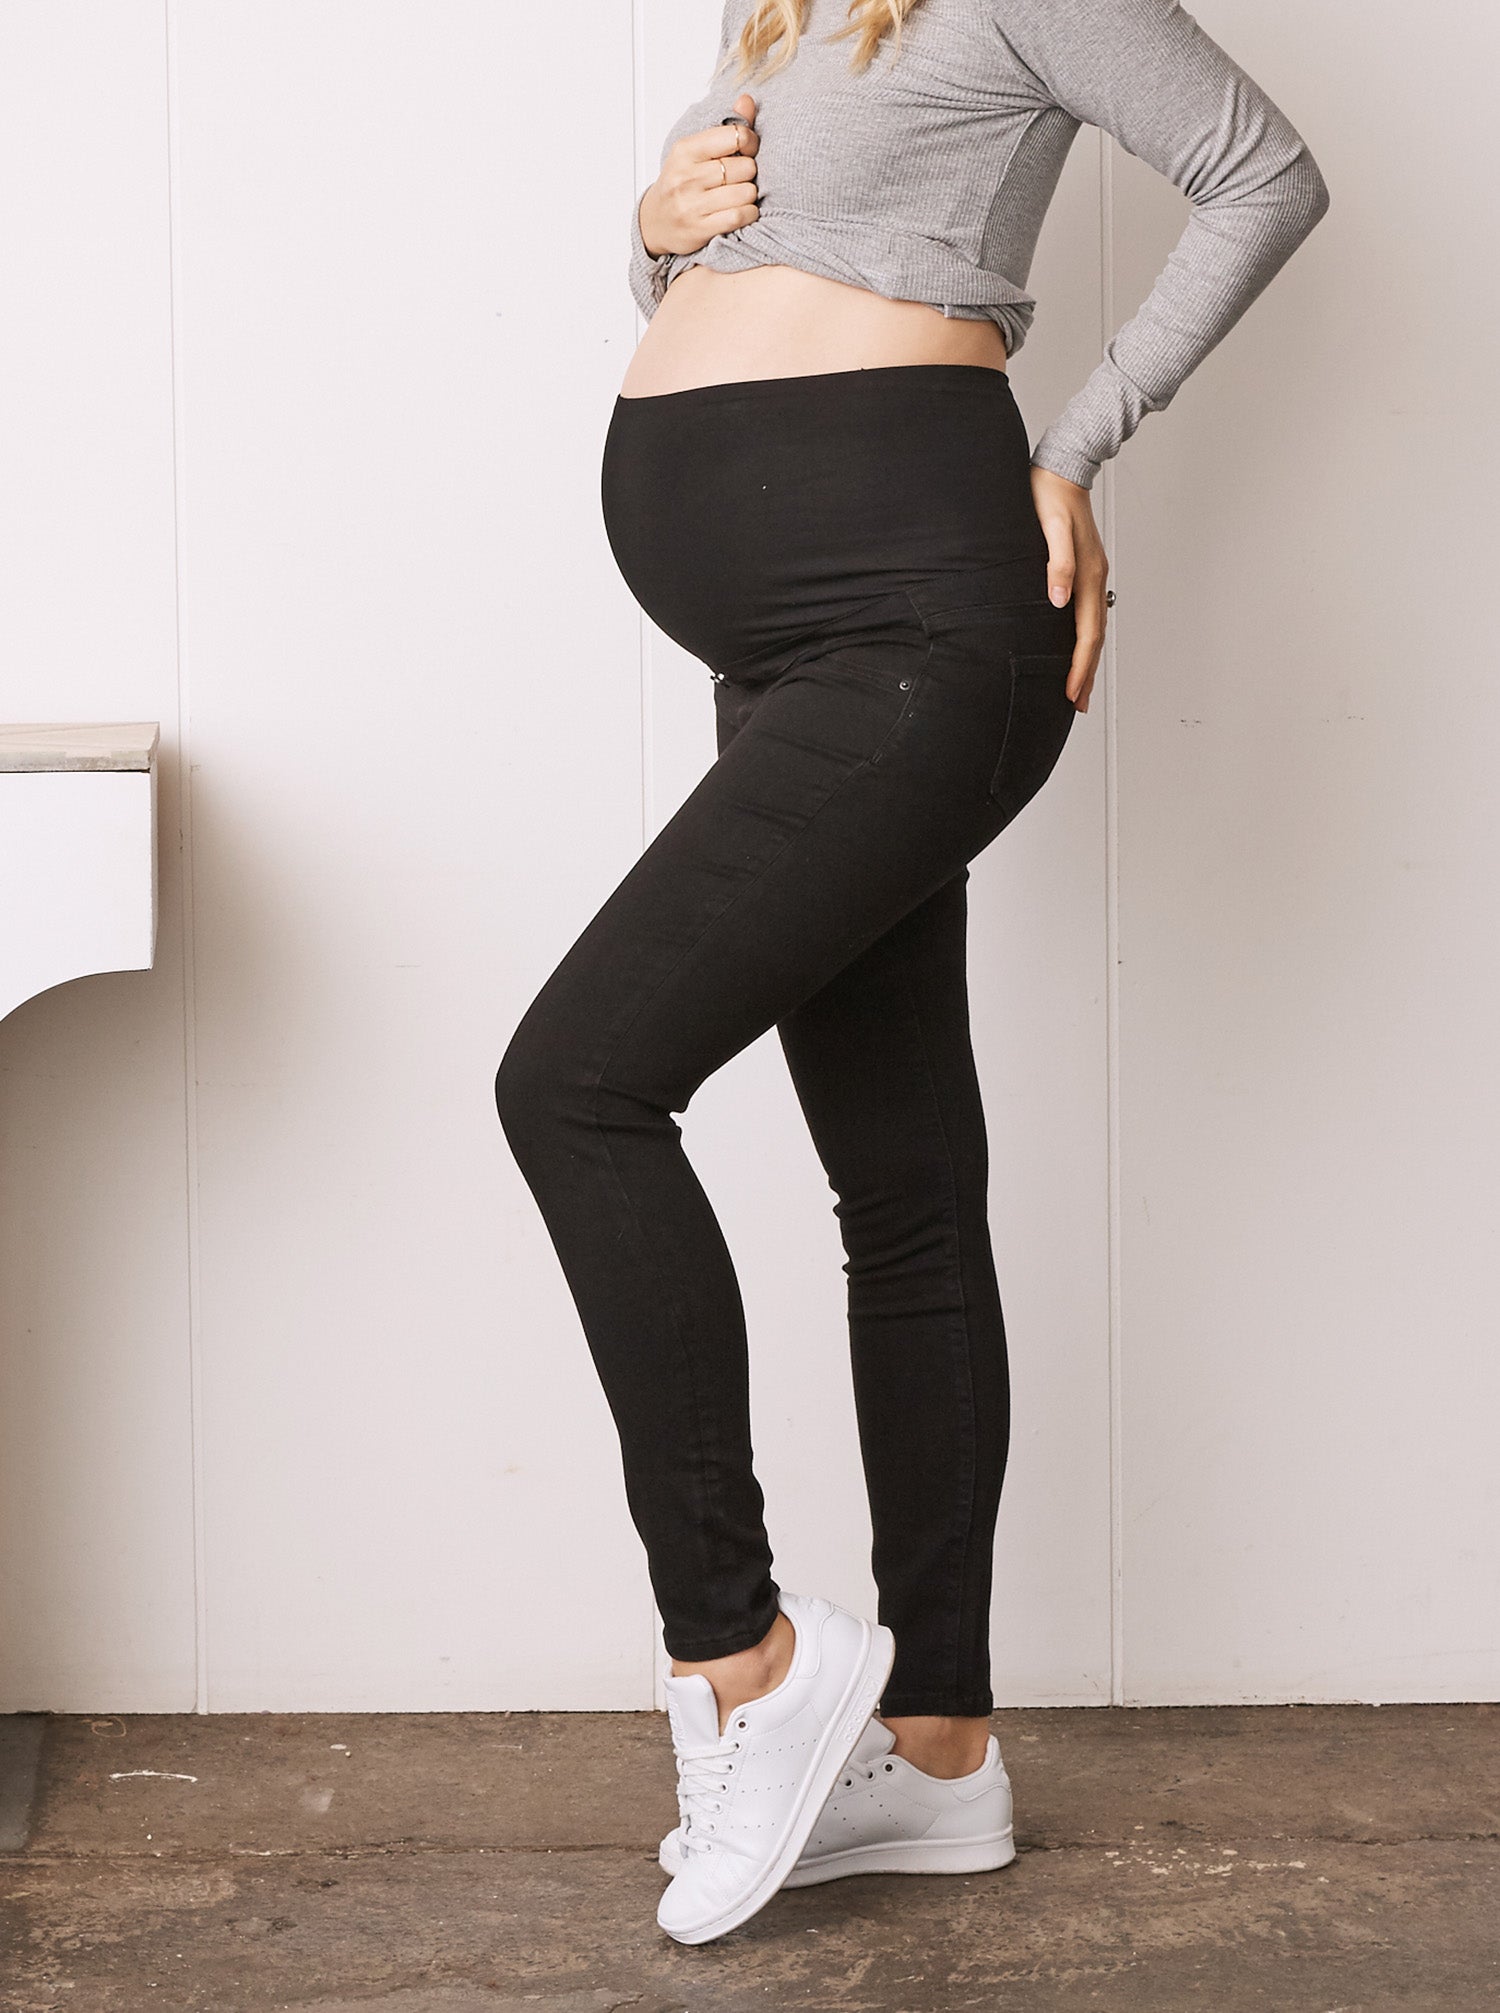 The Boutique Affair Maternity - Over Bump Black Skinny Maternity Jeans  Slimming skinny fit Soft stretch denim Seamless over-bump band Feel  fantastic in the perfect pair of Black Skinny Maternity Jeans –